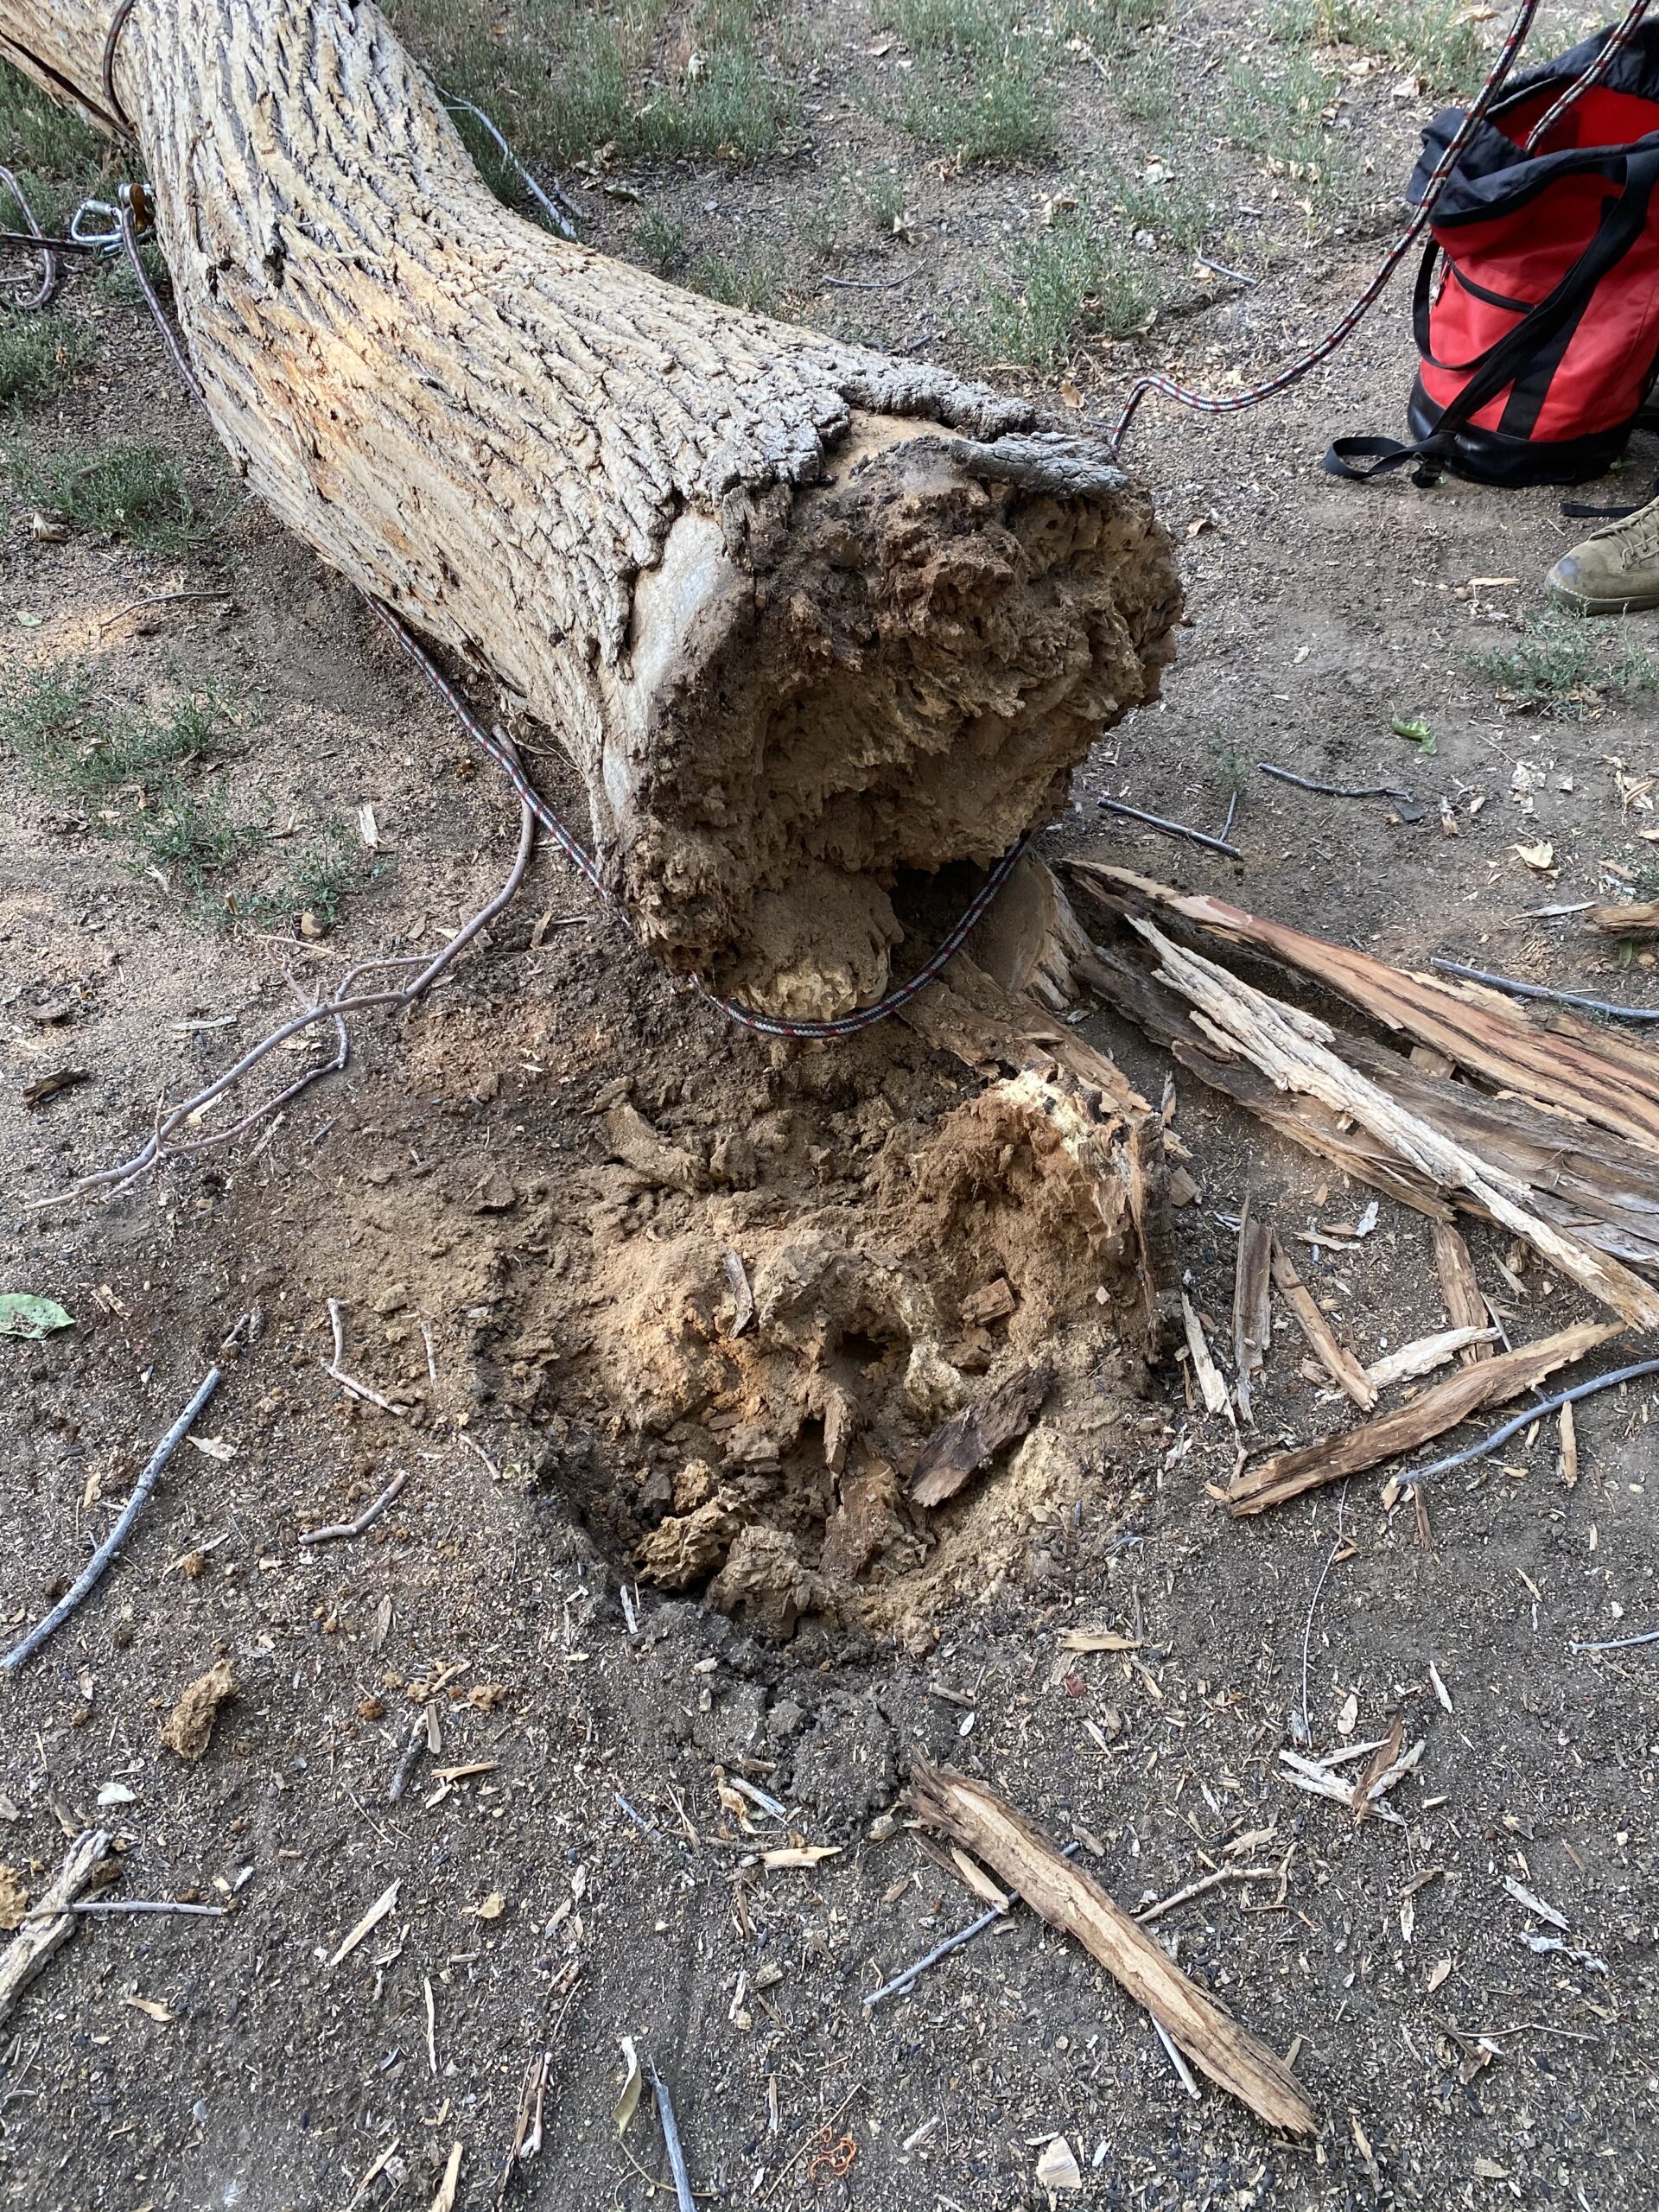 After this tree had died, termites invaded the base. They ate so much that the tree removal team could pull it down with ropes, instead of cutting it down with chainsaws.